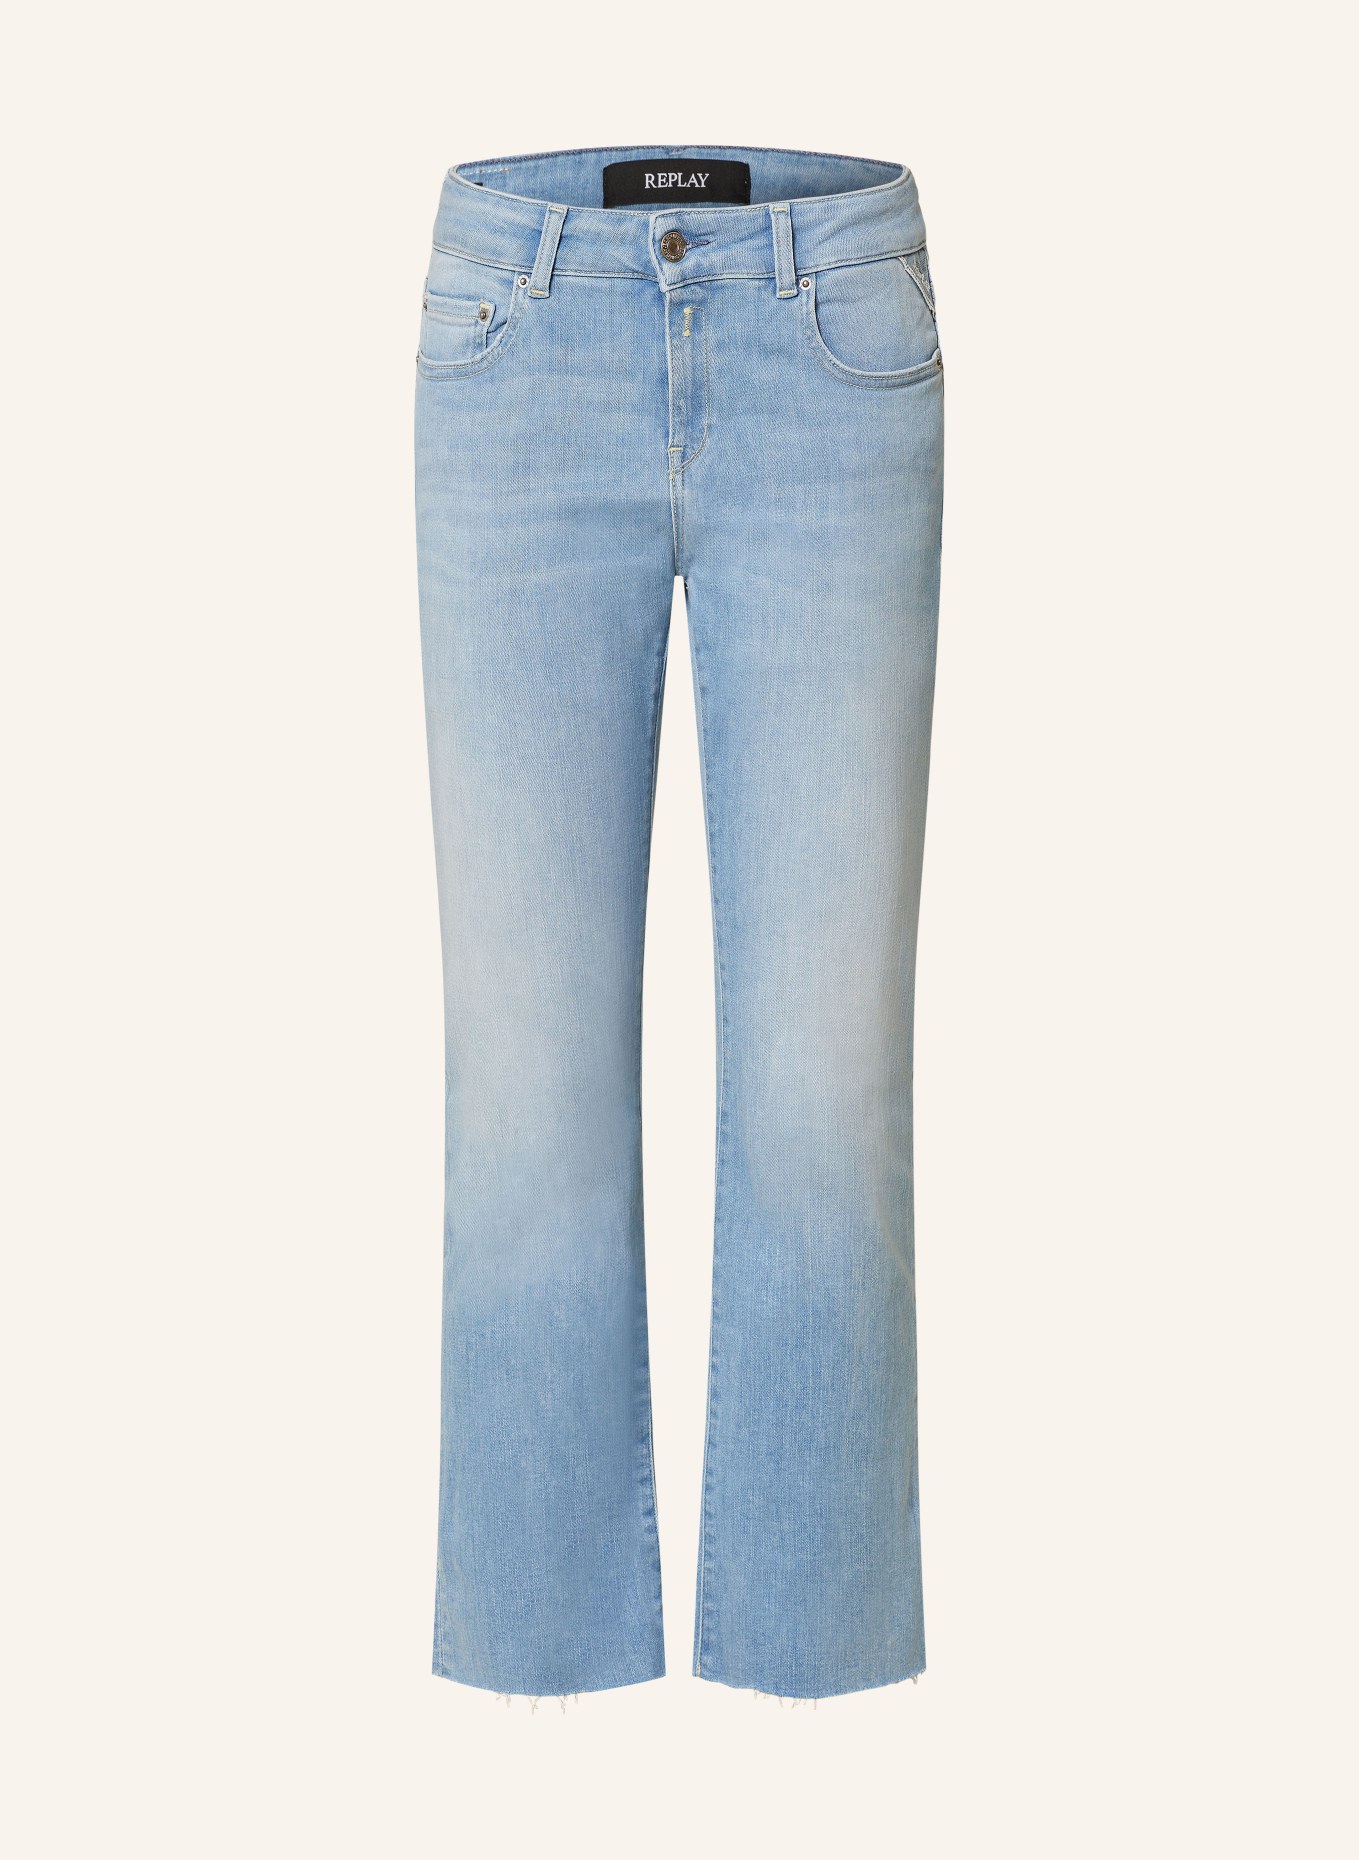 REPLAY Flared Jeans FAABY, Farbe: 010 LIGHT BLUE (Bild 1)